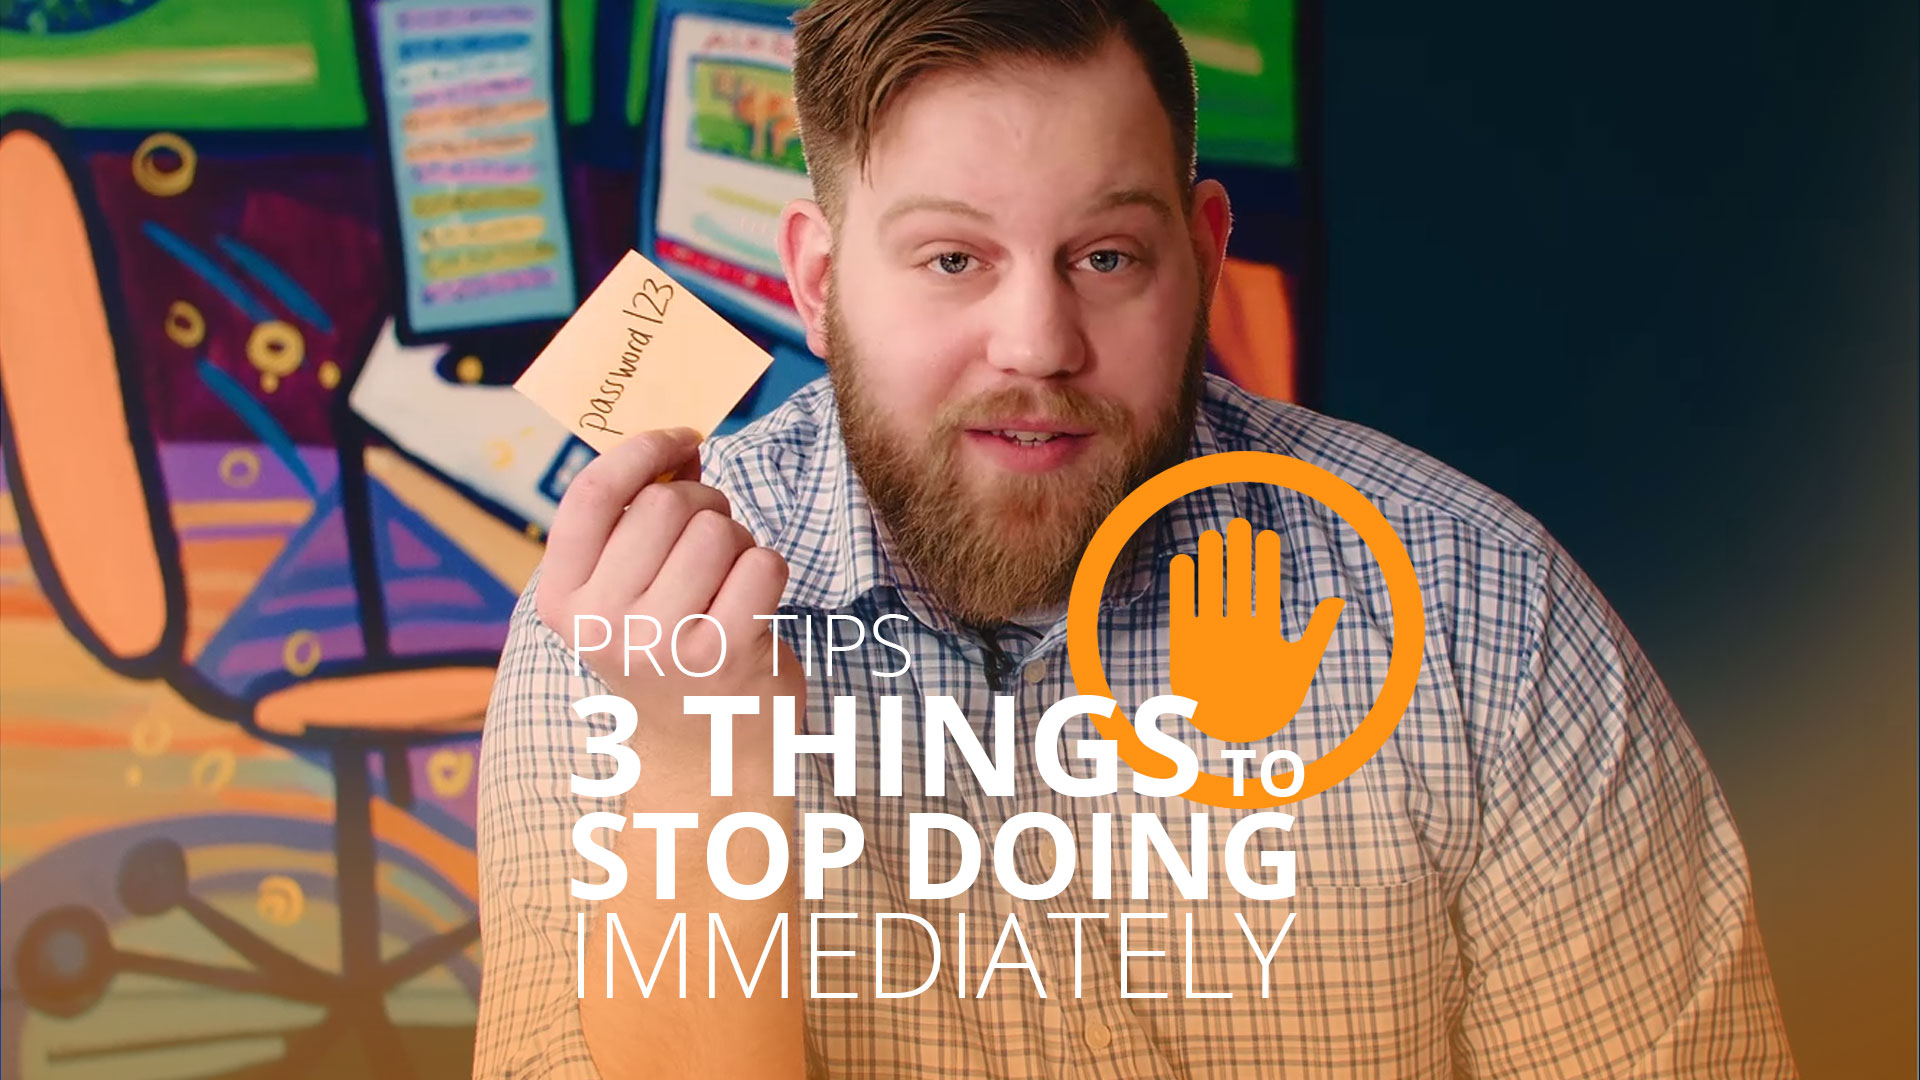 IT Security Pro Tips | Three Things to Stop Doing Immediately